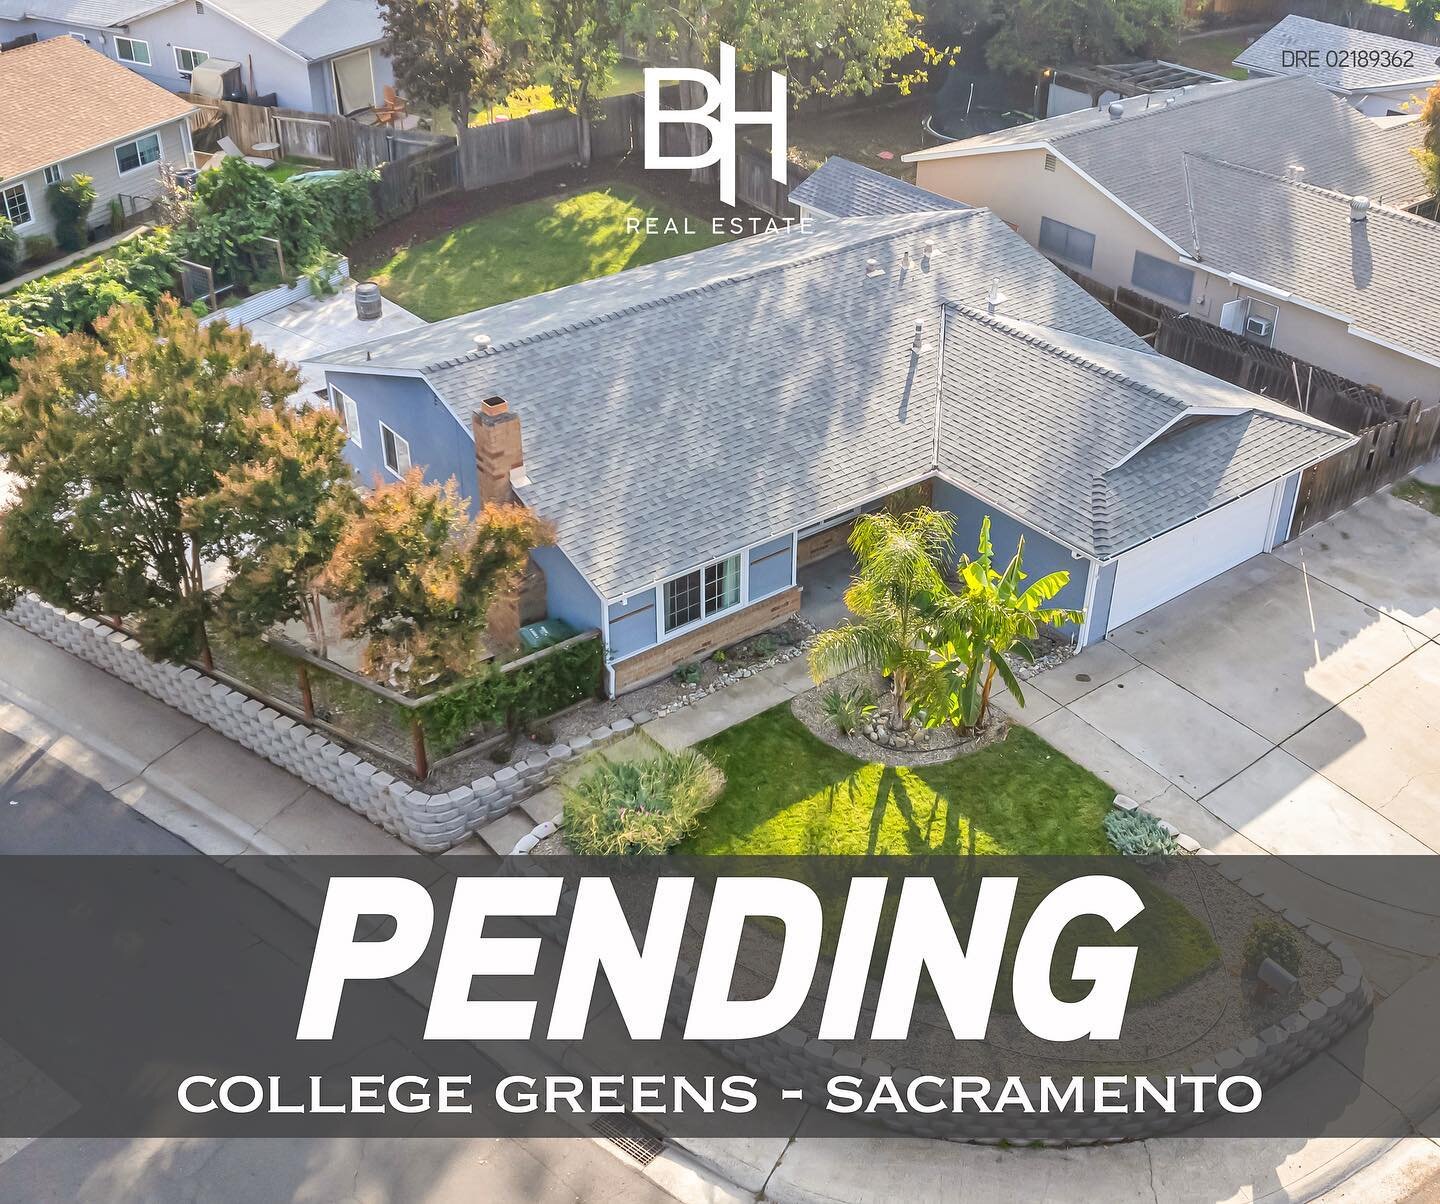 P E N D I N G 📬 : We are pleased to say that our listing of 8720 Barracuda Way is now in contract! After receiving a total of 5 offers, our patient seller is now underway in a smooth escrow. 
During our days on market, we were able to have two of ou